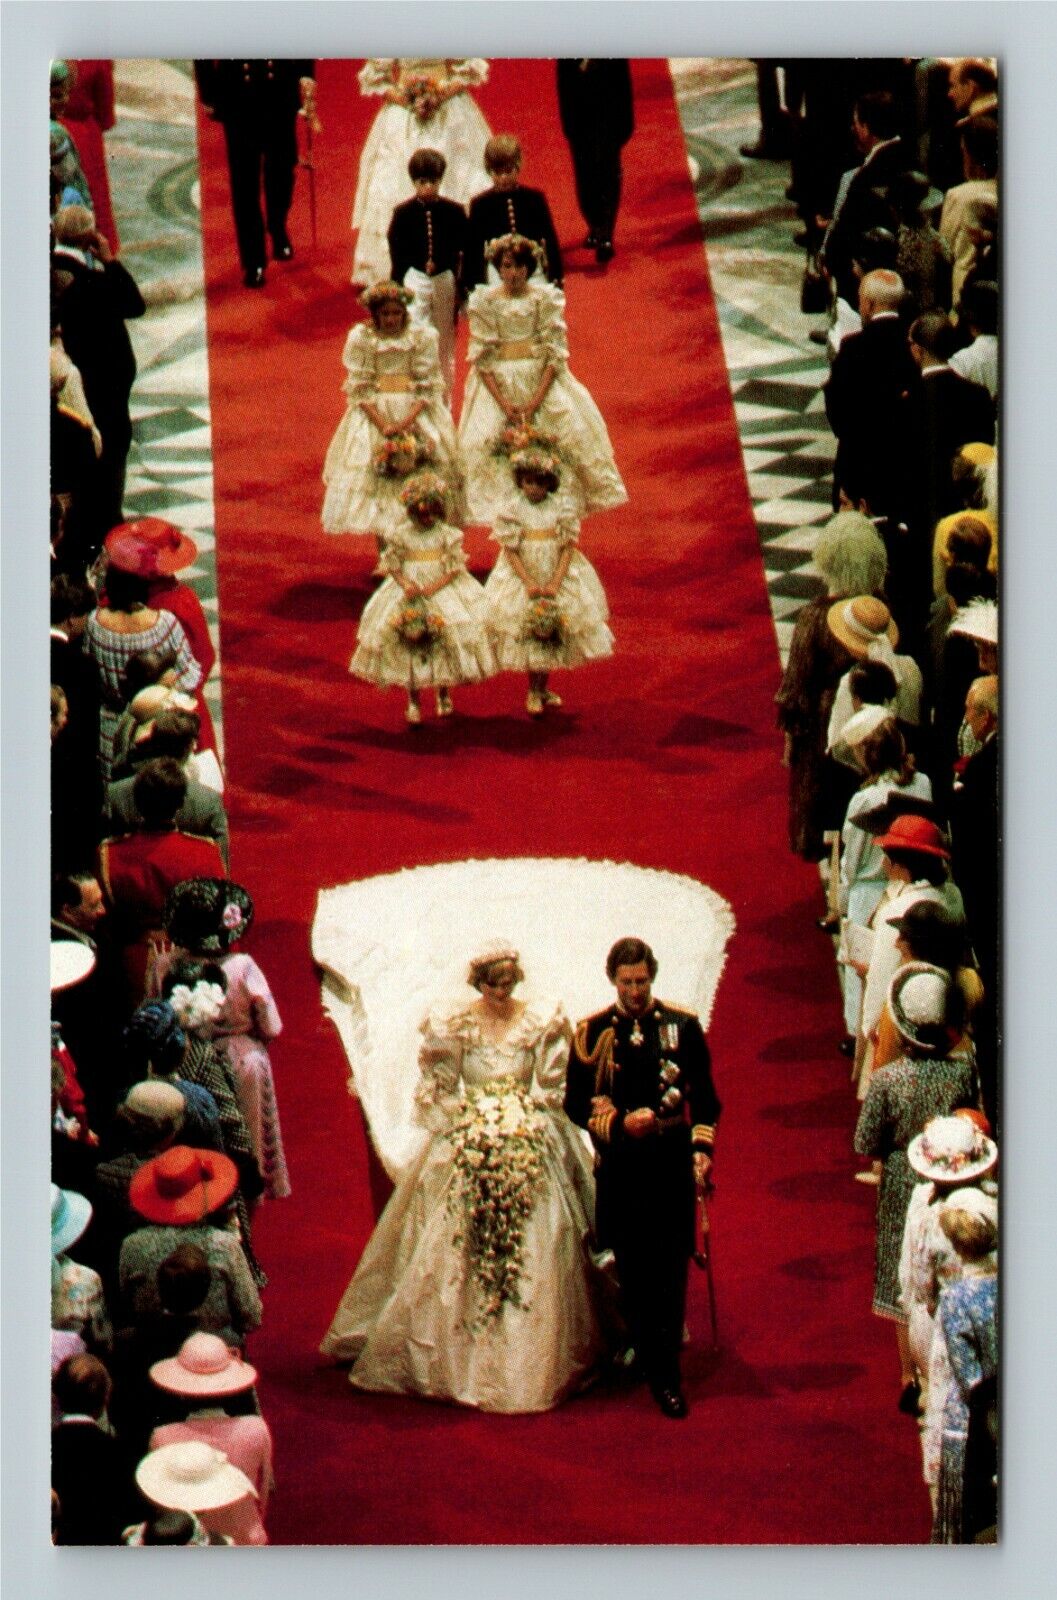 Prince Philip and Lady Diana, Wedding, Aerial View, Vintage Postcard